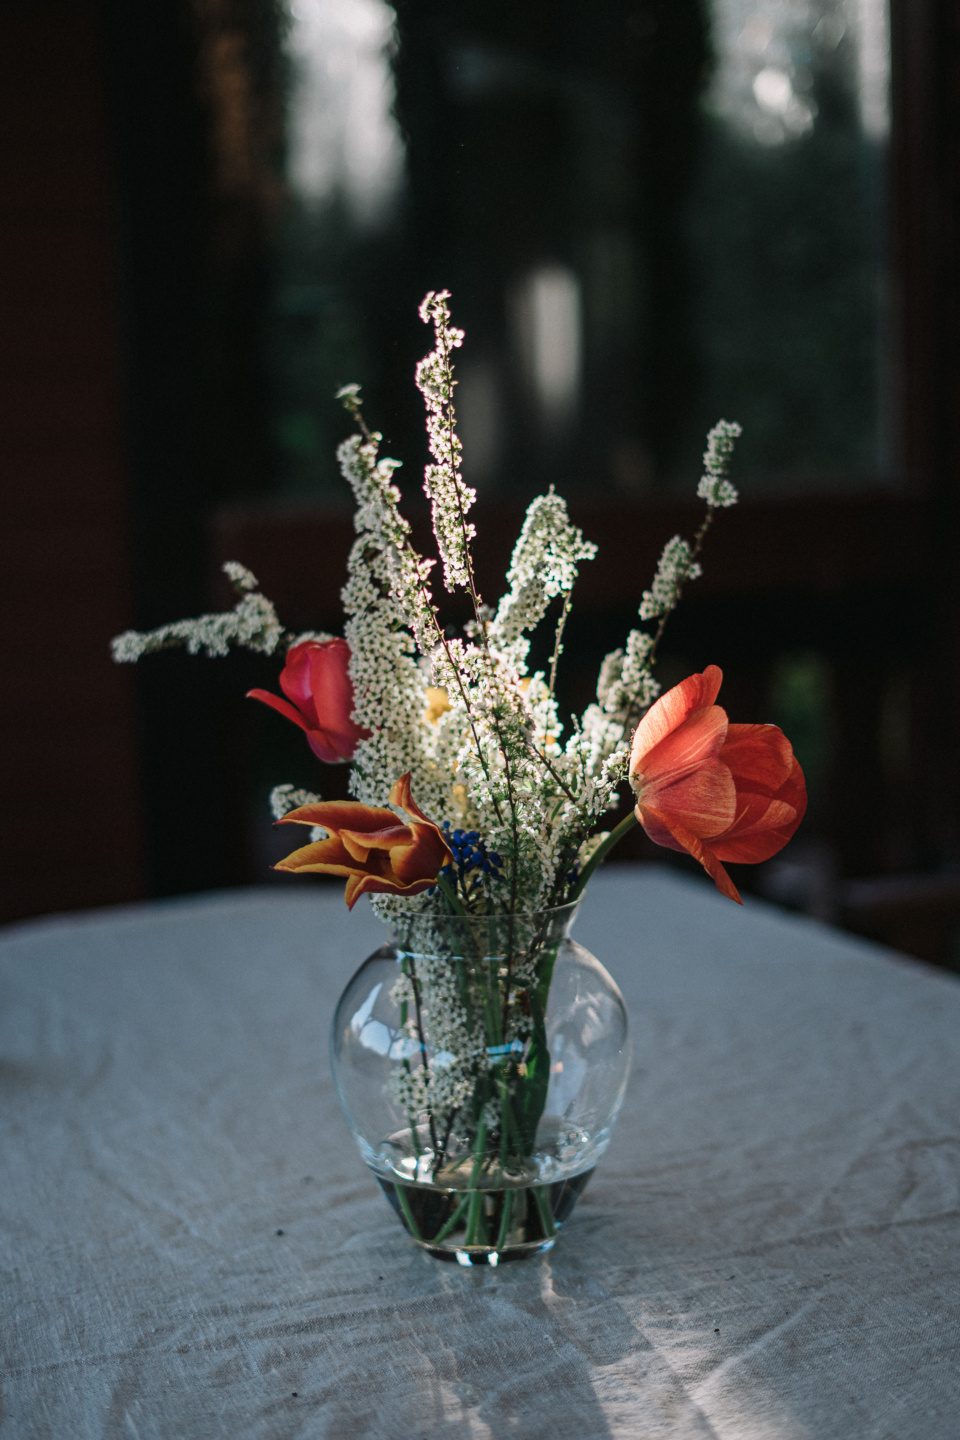 Vase with flowers on table